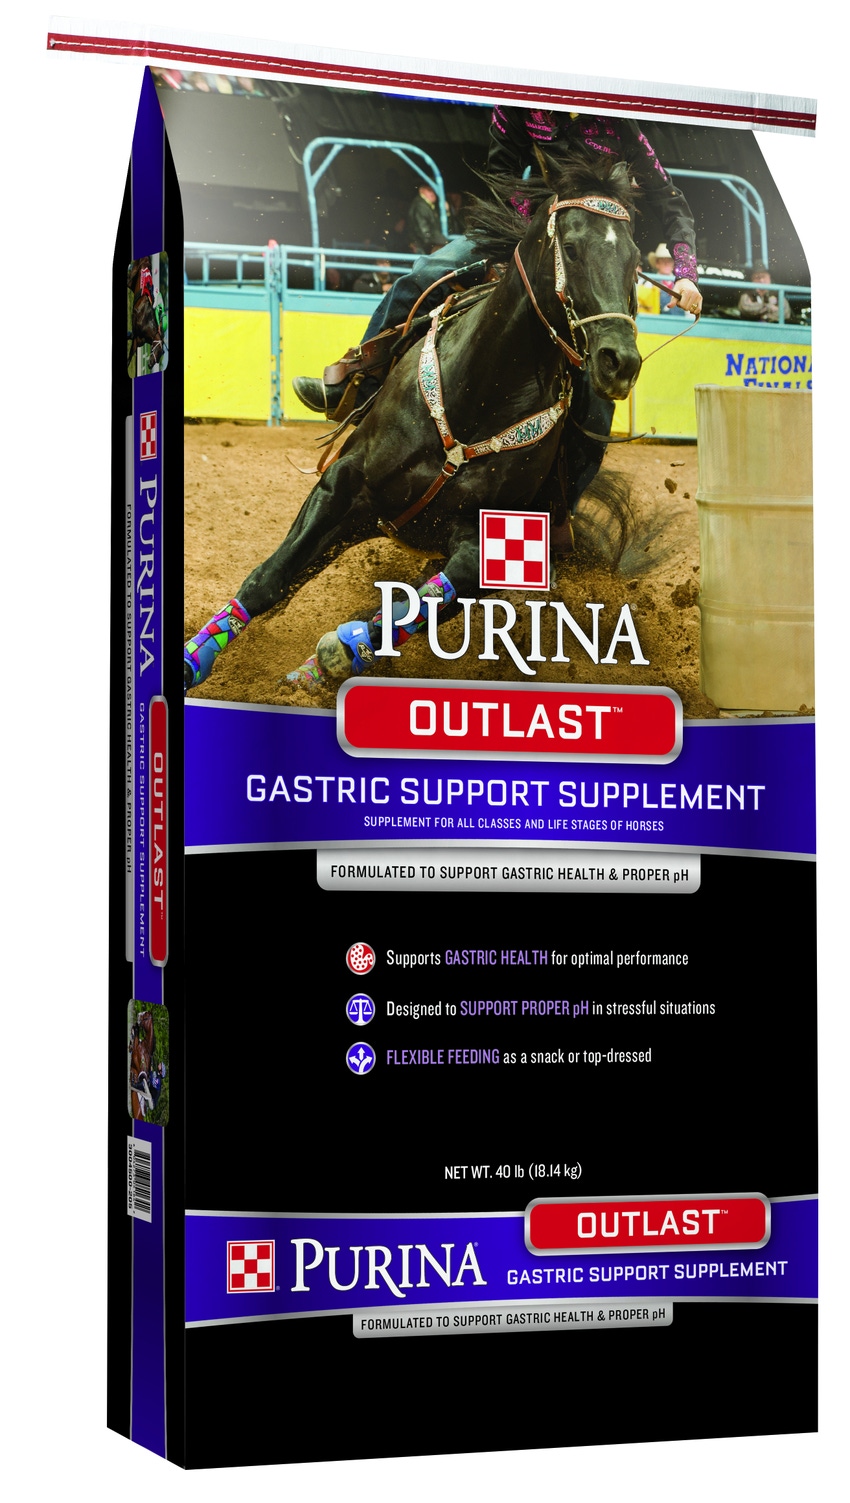 Purina introduces Outlast gastric support supplement